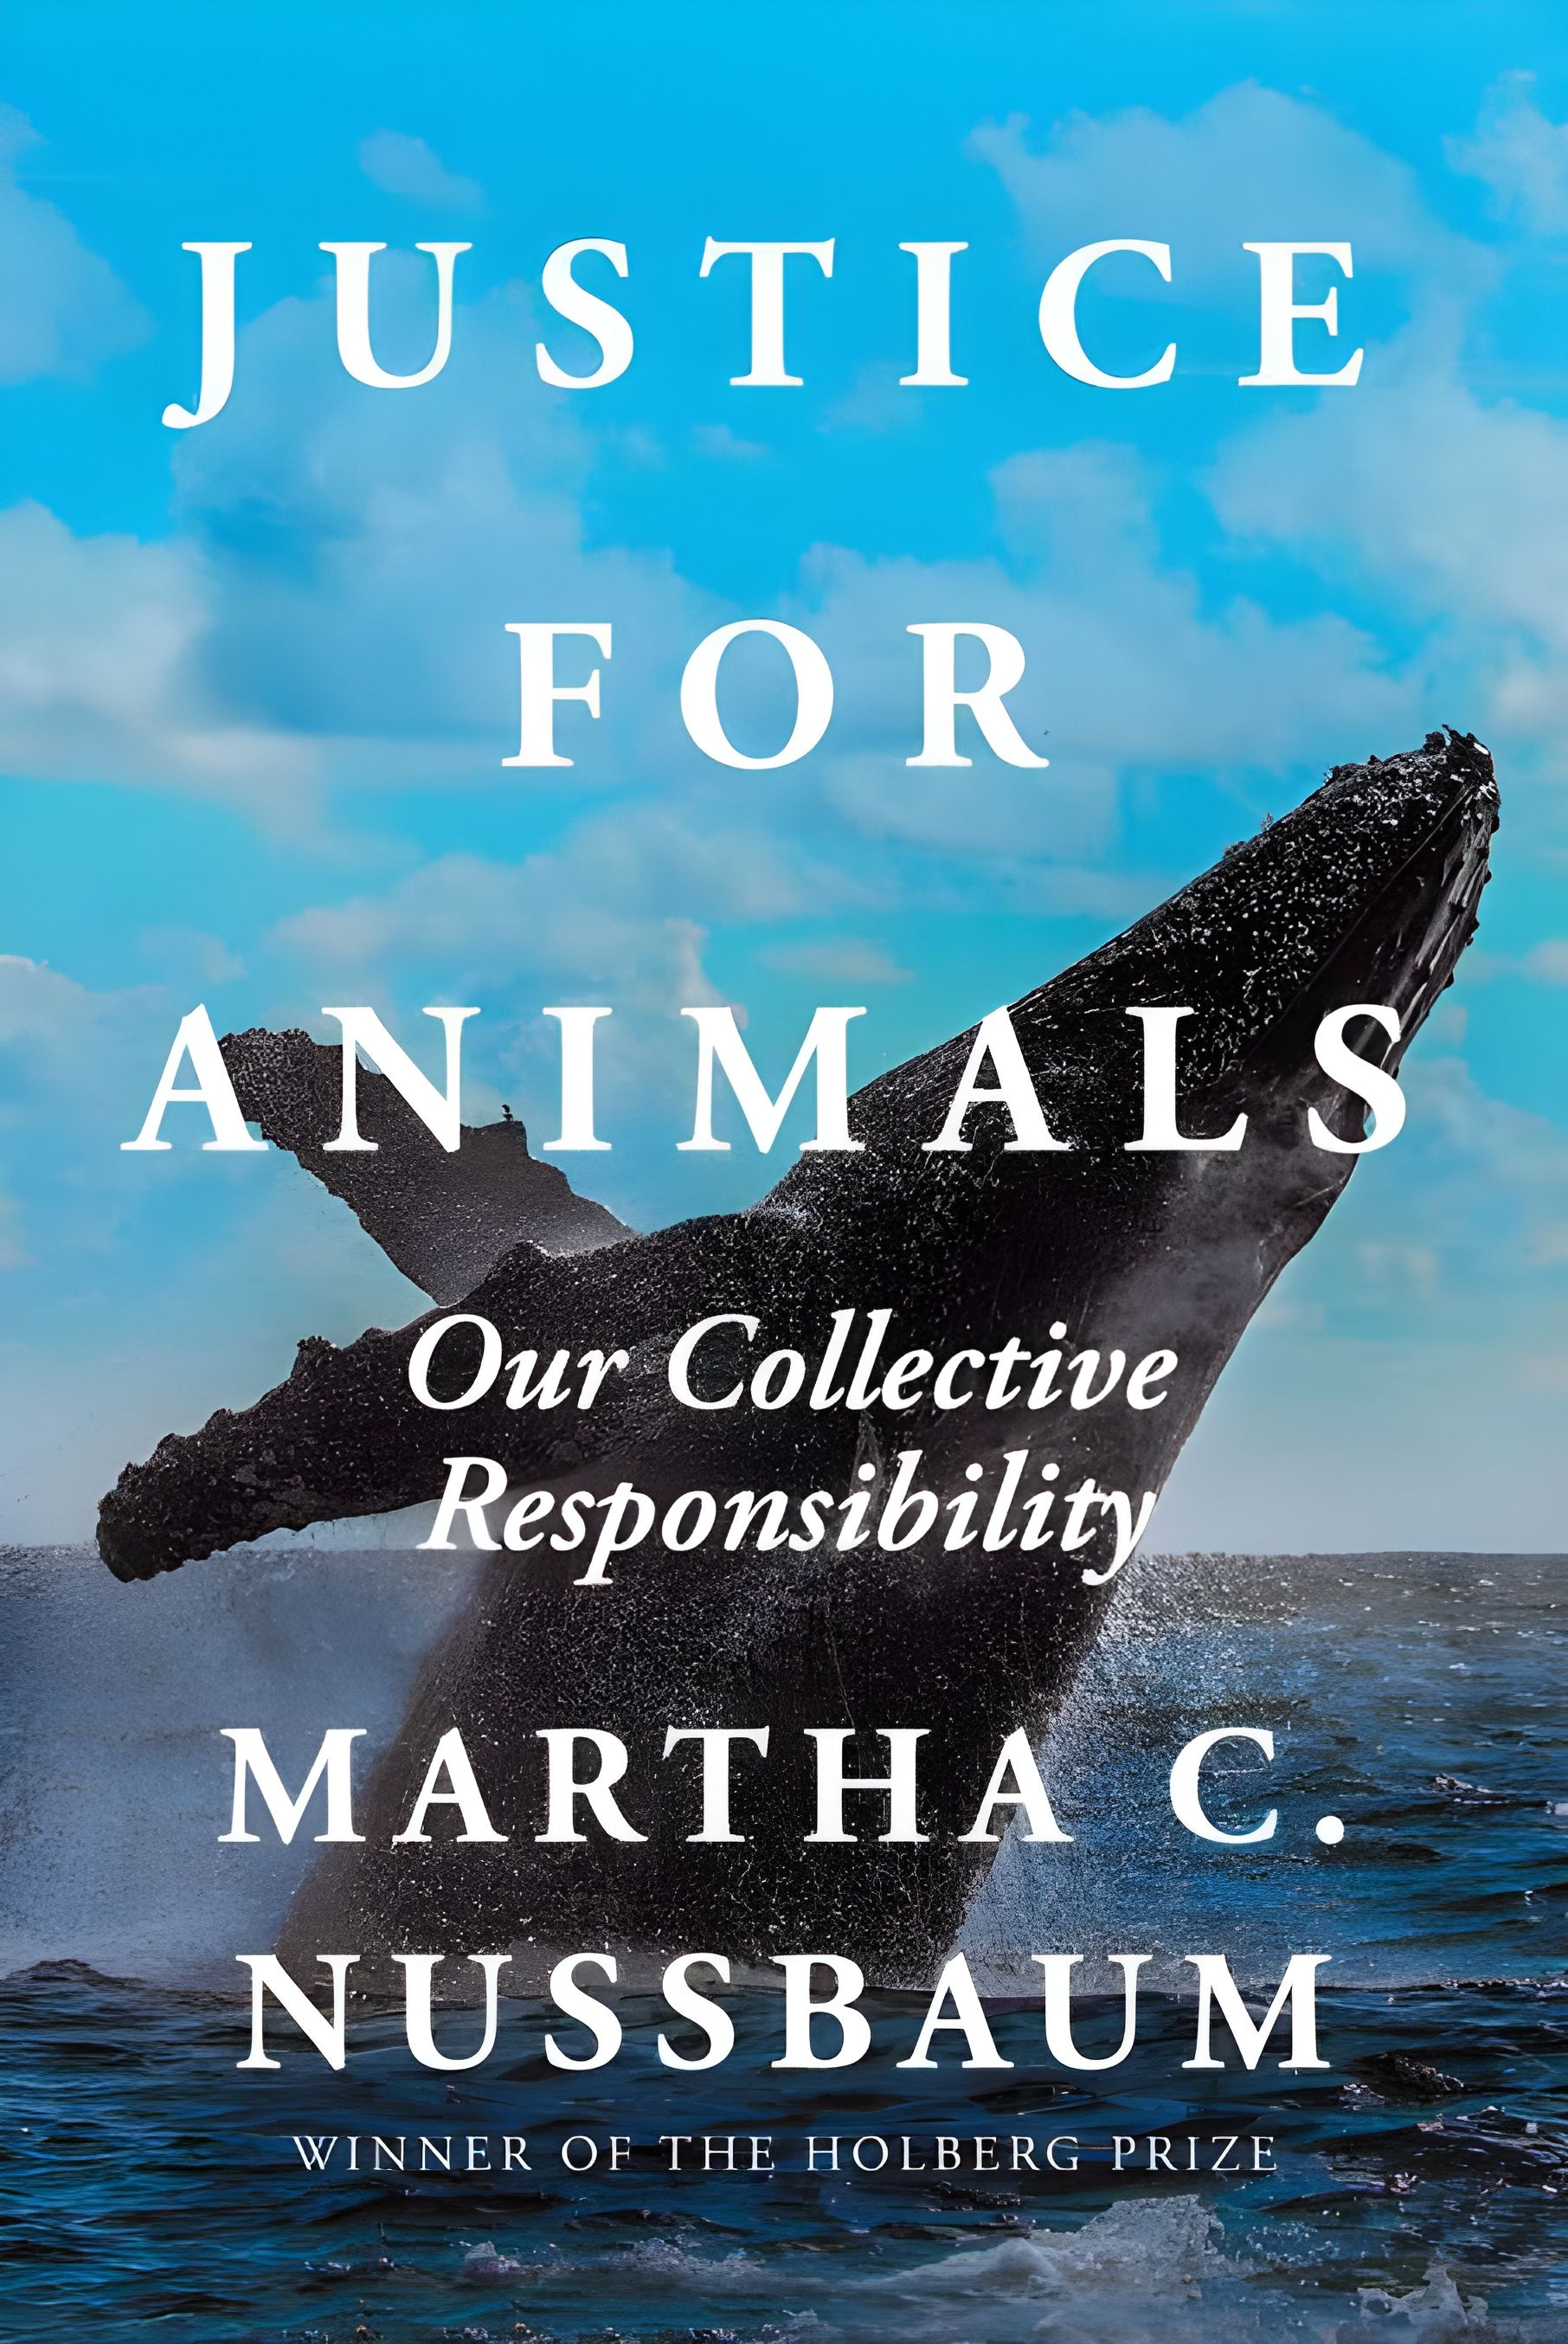 Book cover of "Justice for Animals" by Martha Nussbaum